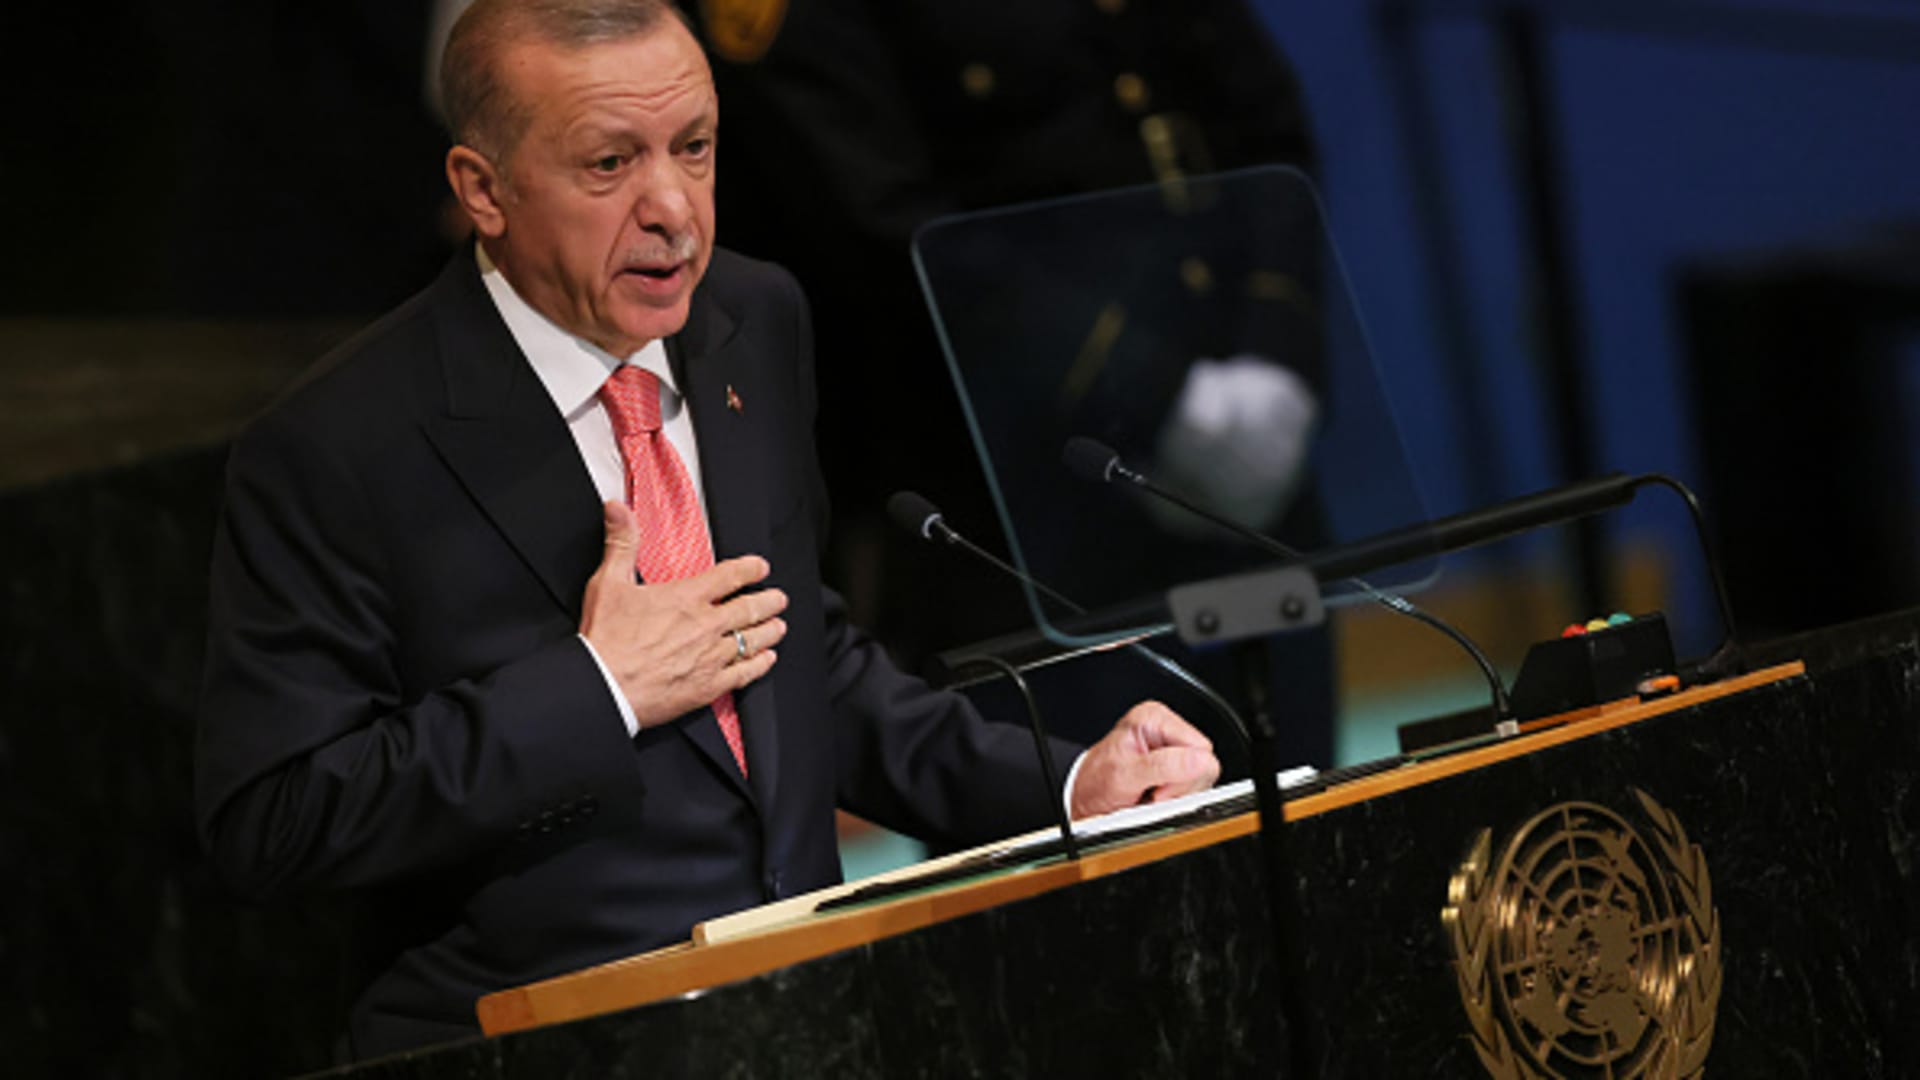 Turkish President Recep Tayyip Erdoğan speaks at the 77th session of the United Nations General Assembly at U.N. headquarters on September 20, 2022 in New York City.